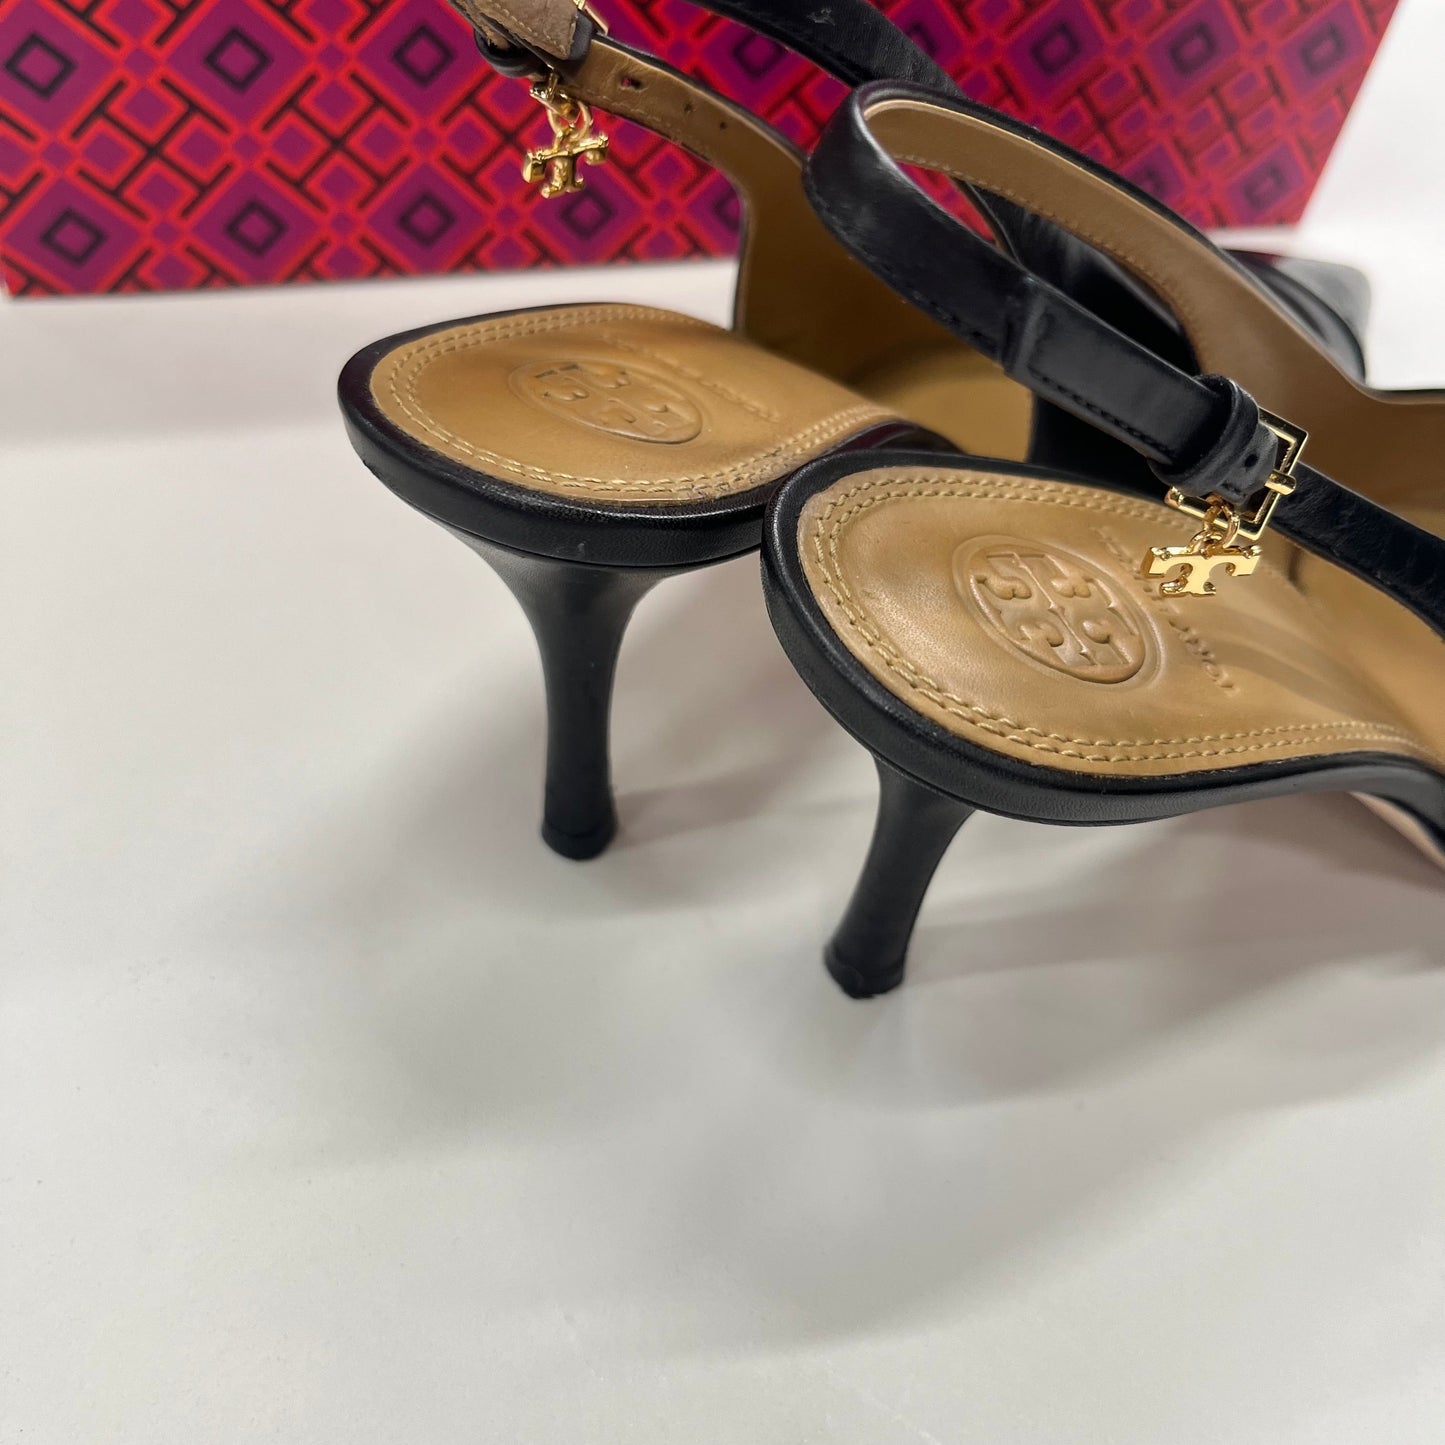 Black Shoes Heels D Orsay Tory Burch, Size 9